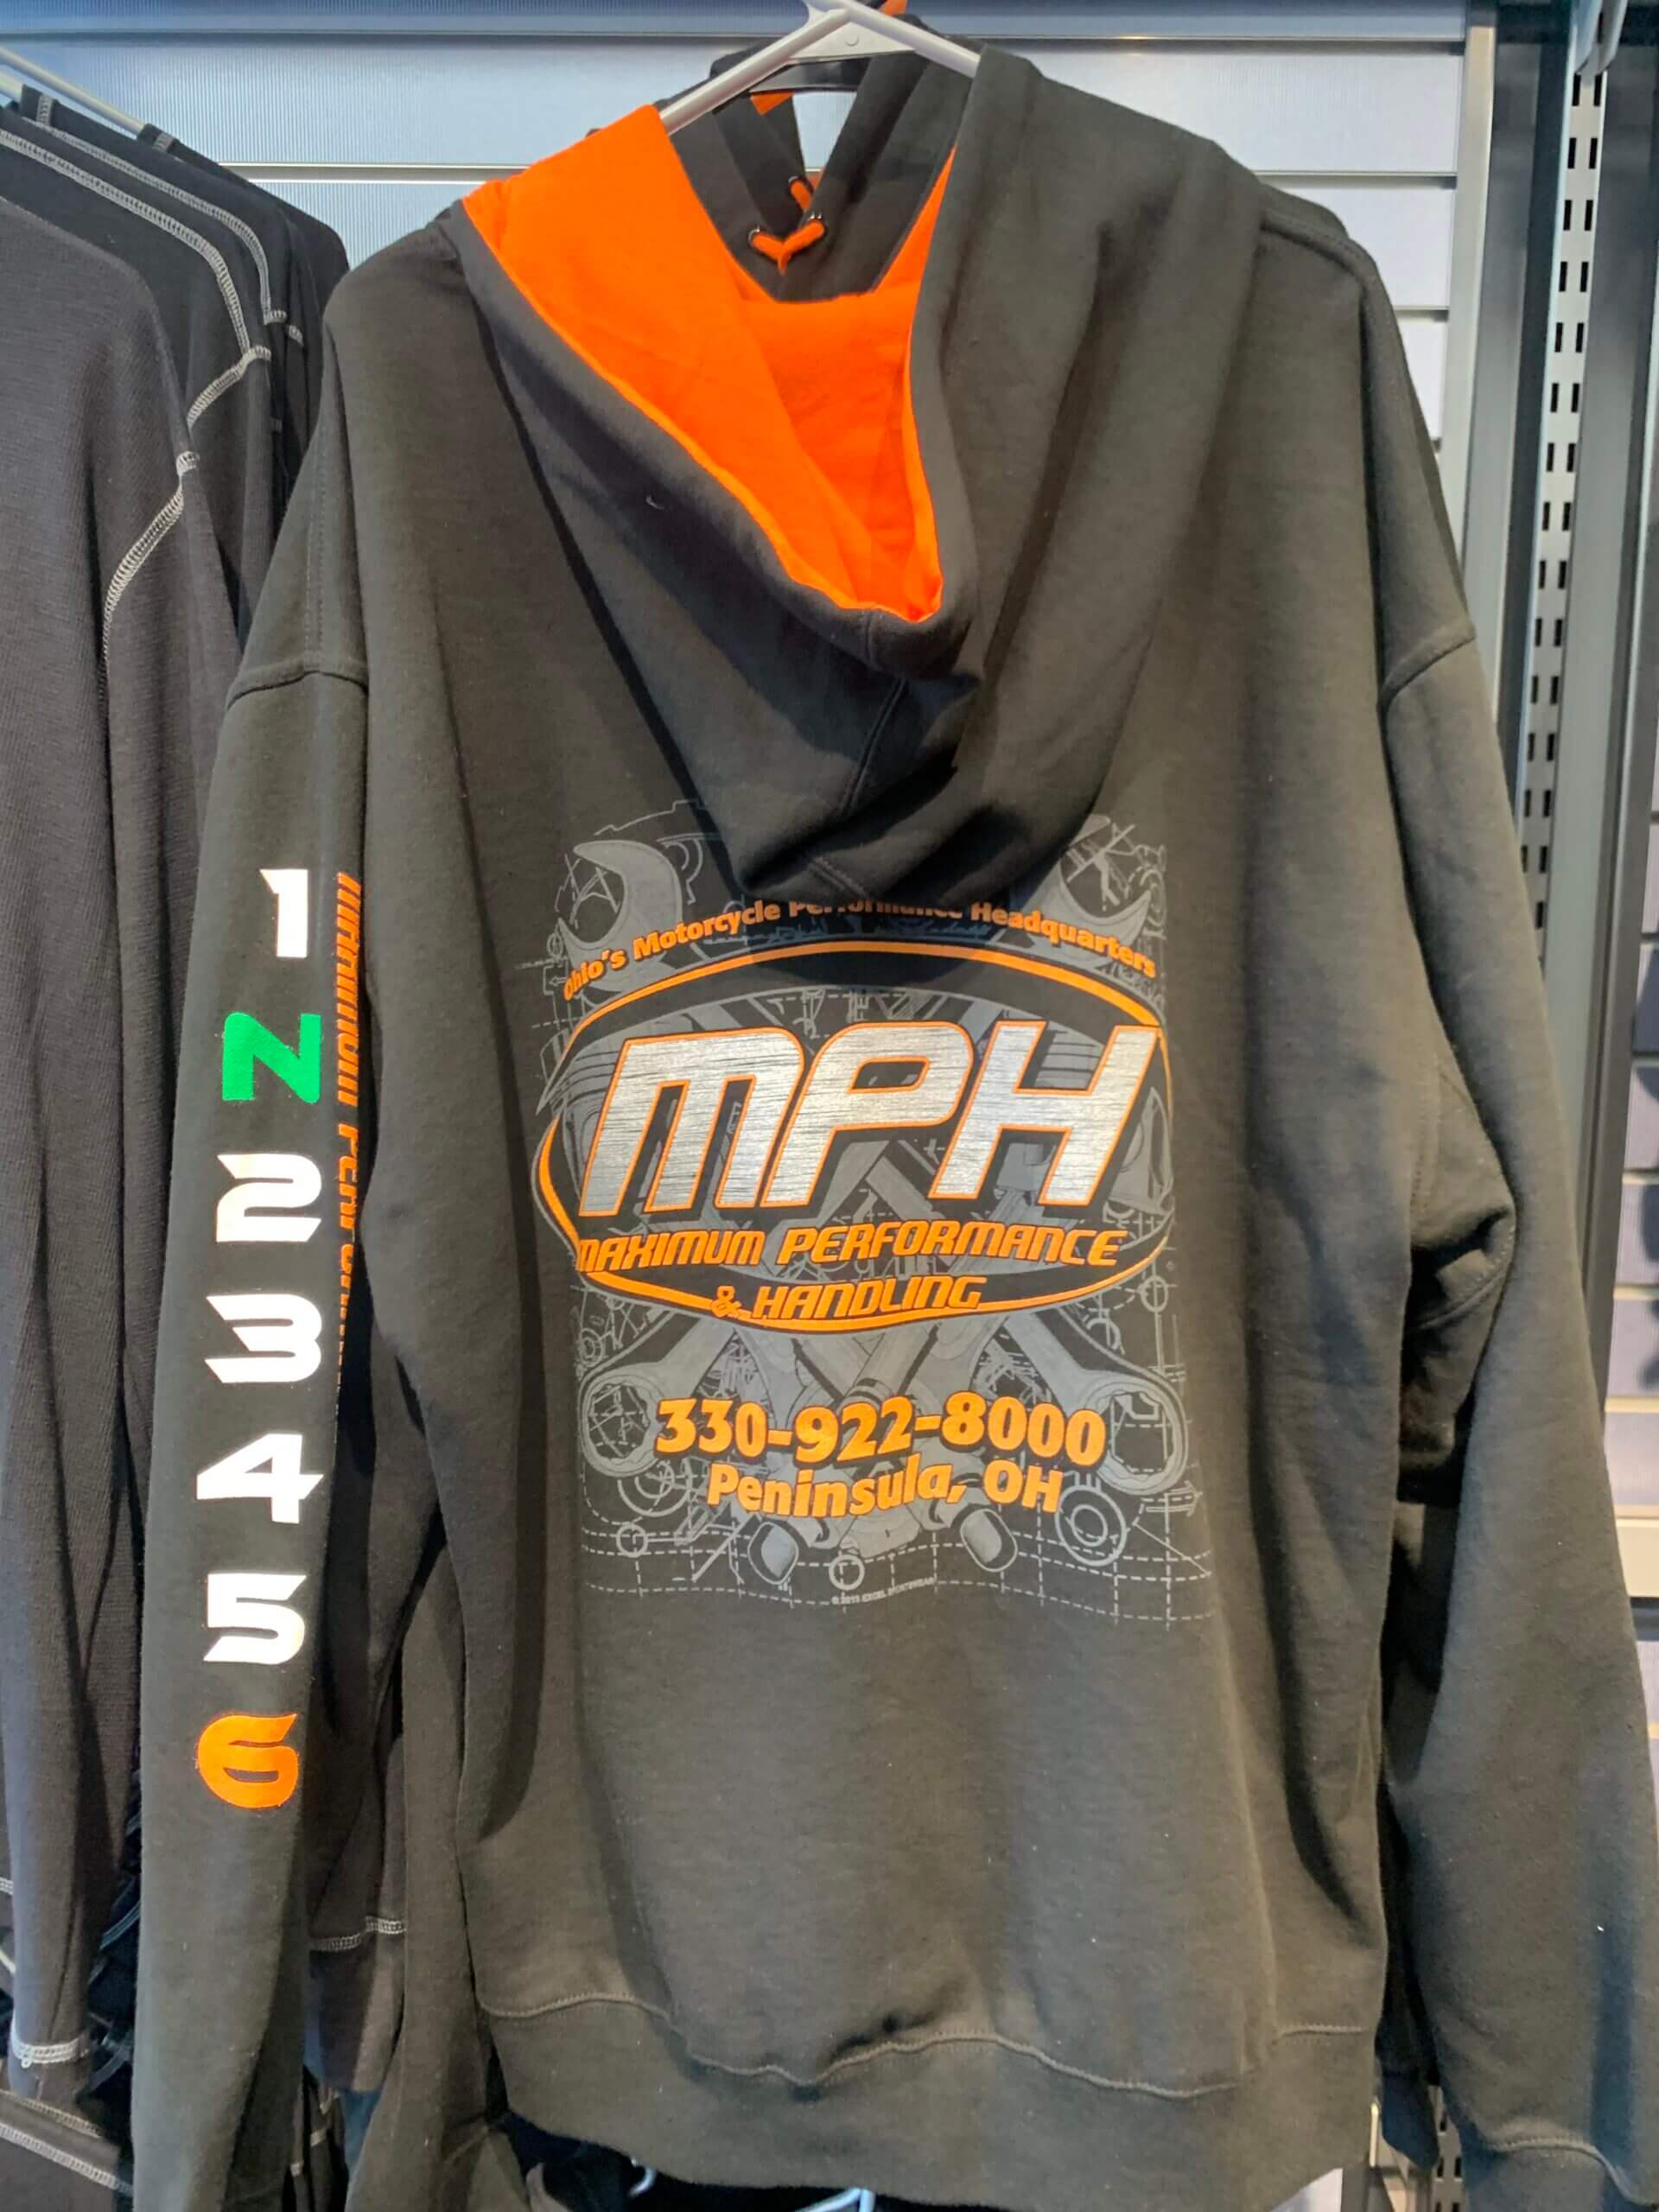 Grey and orange colored MPH T-shirt